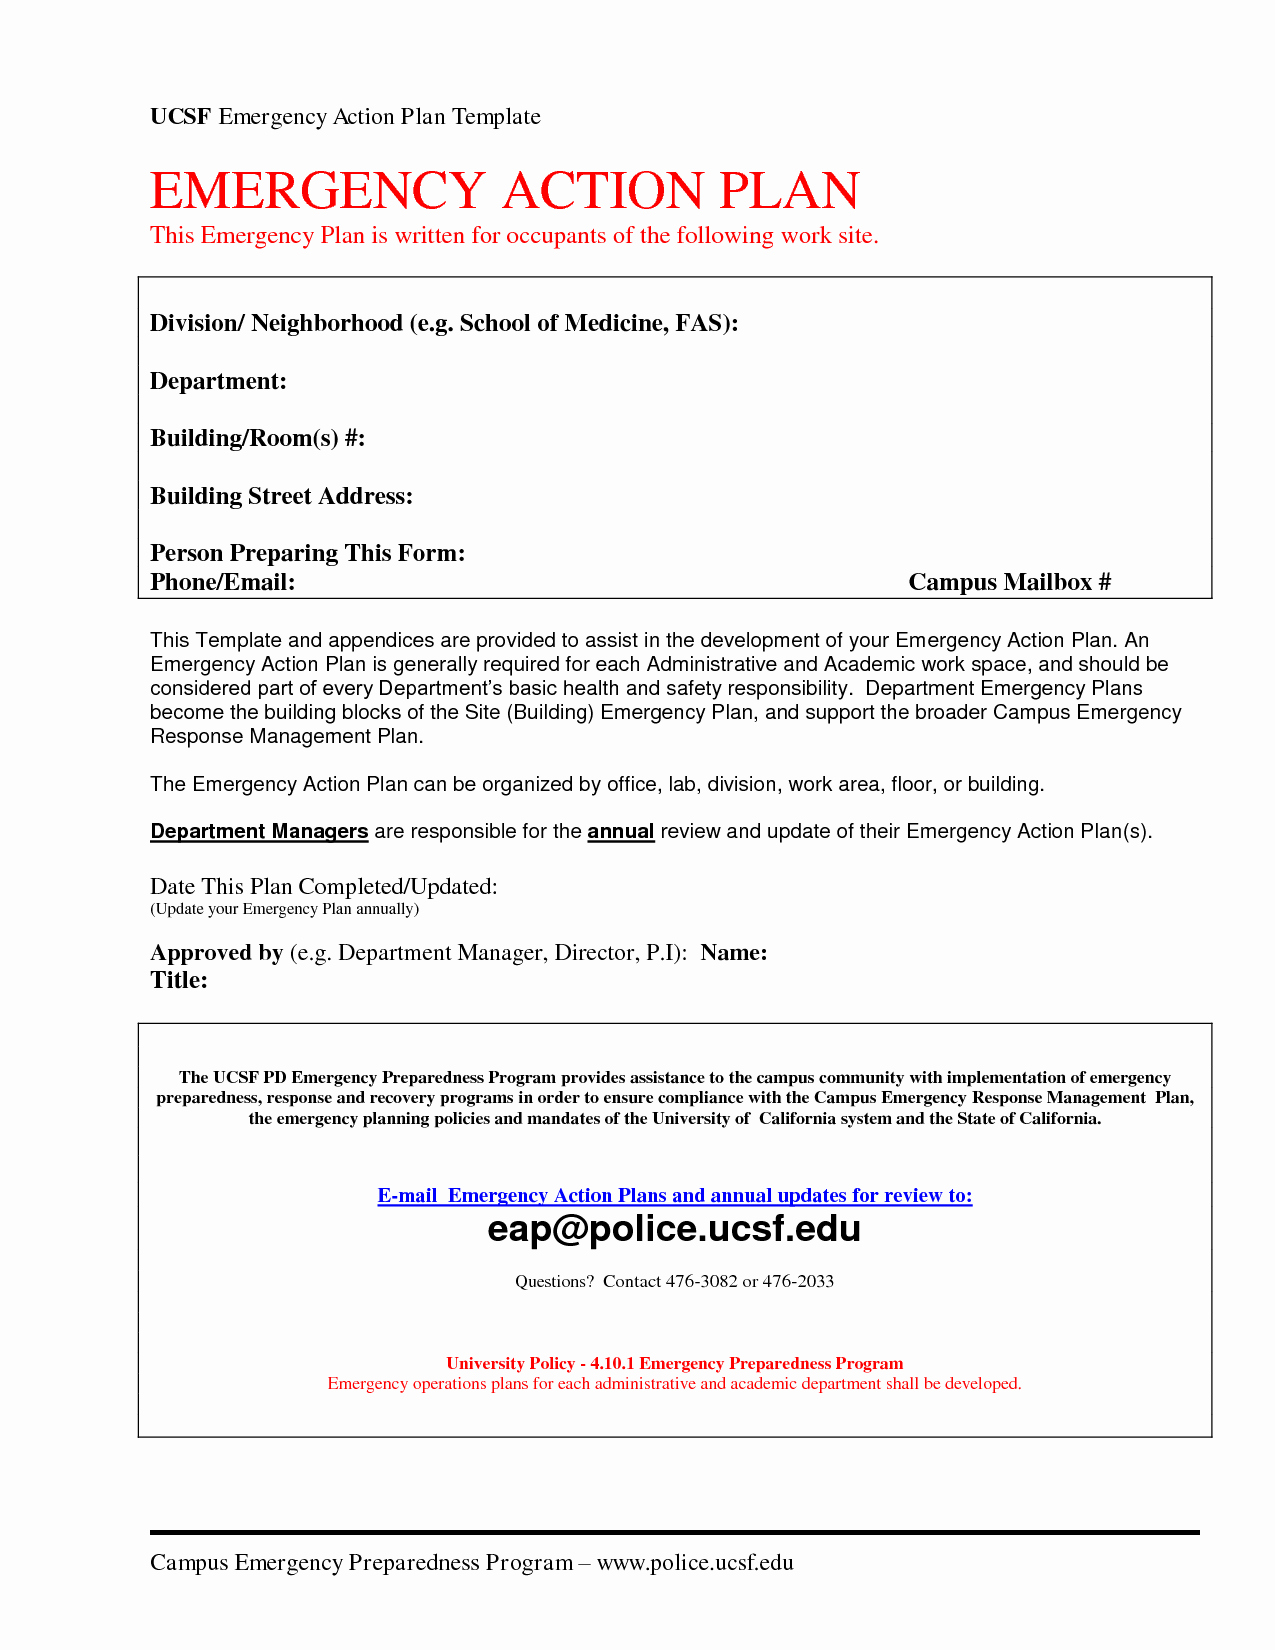 Emergency Action Plan Template Luxury Emergency Action Plan Template